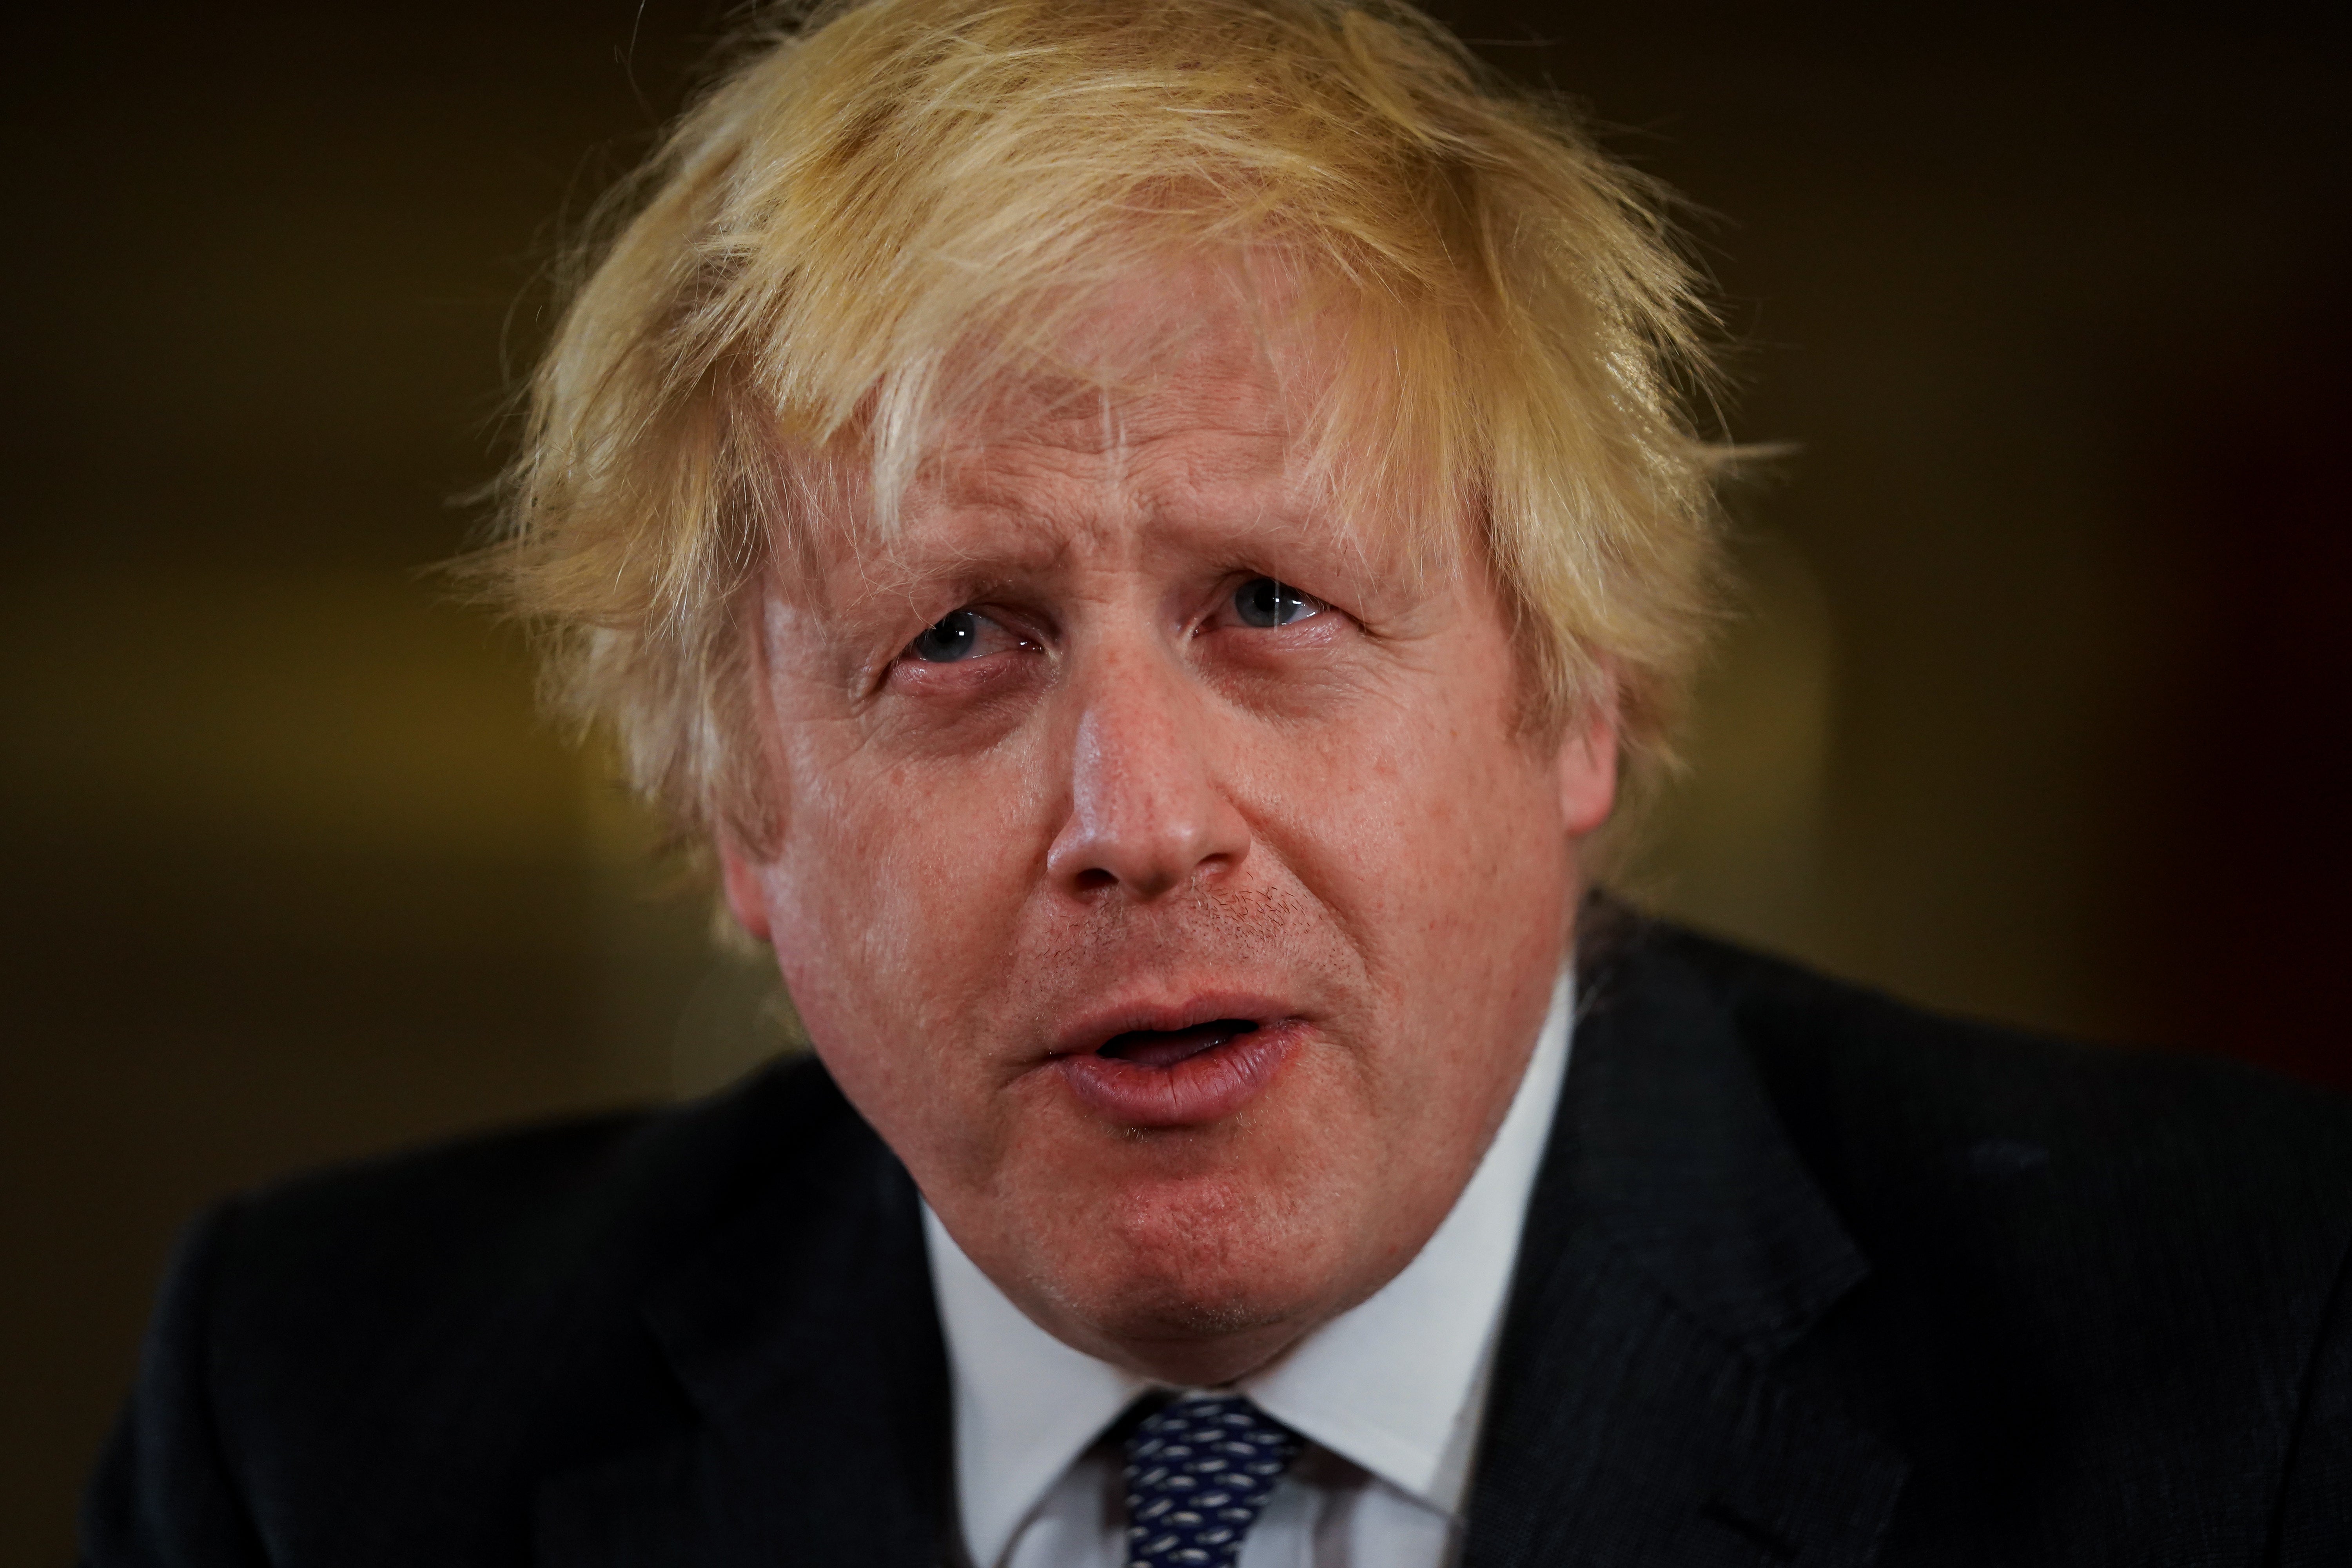 Prime Minister Boris Johnson recorded an address to the nation at Downing Street (Kirsty O’Connor/PA)